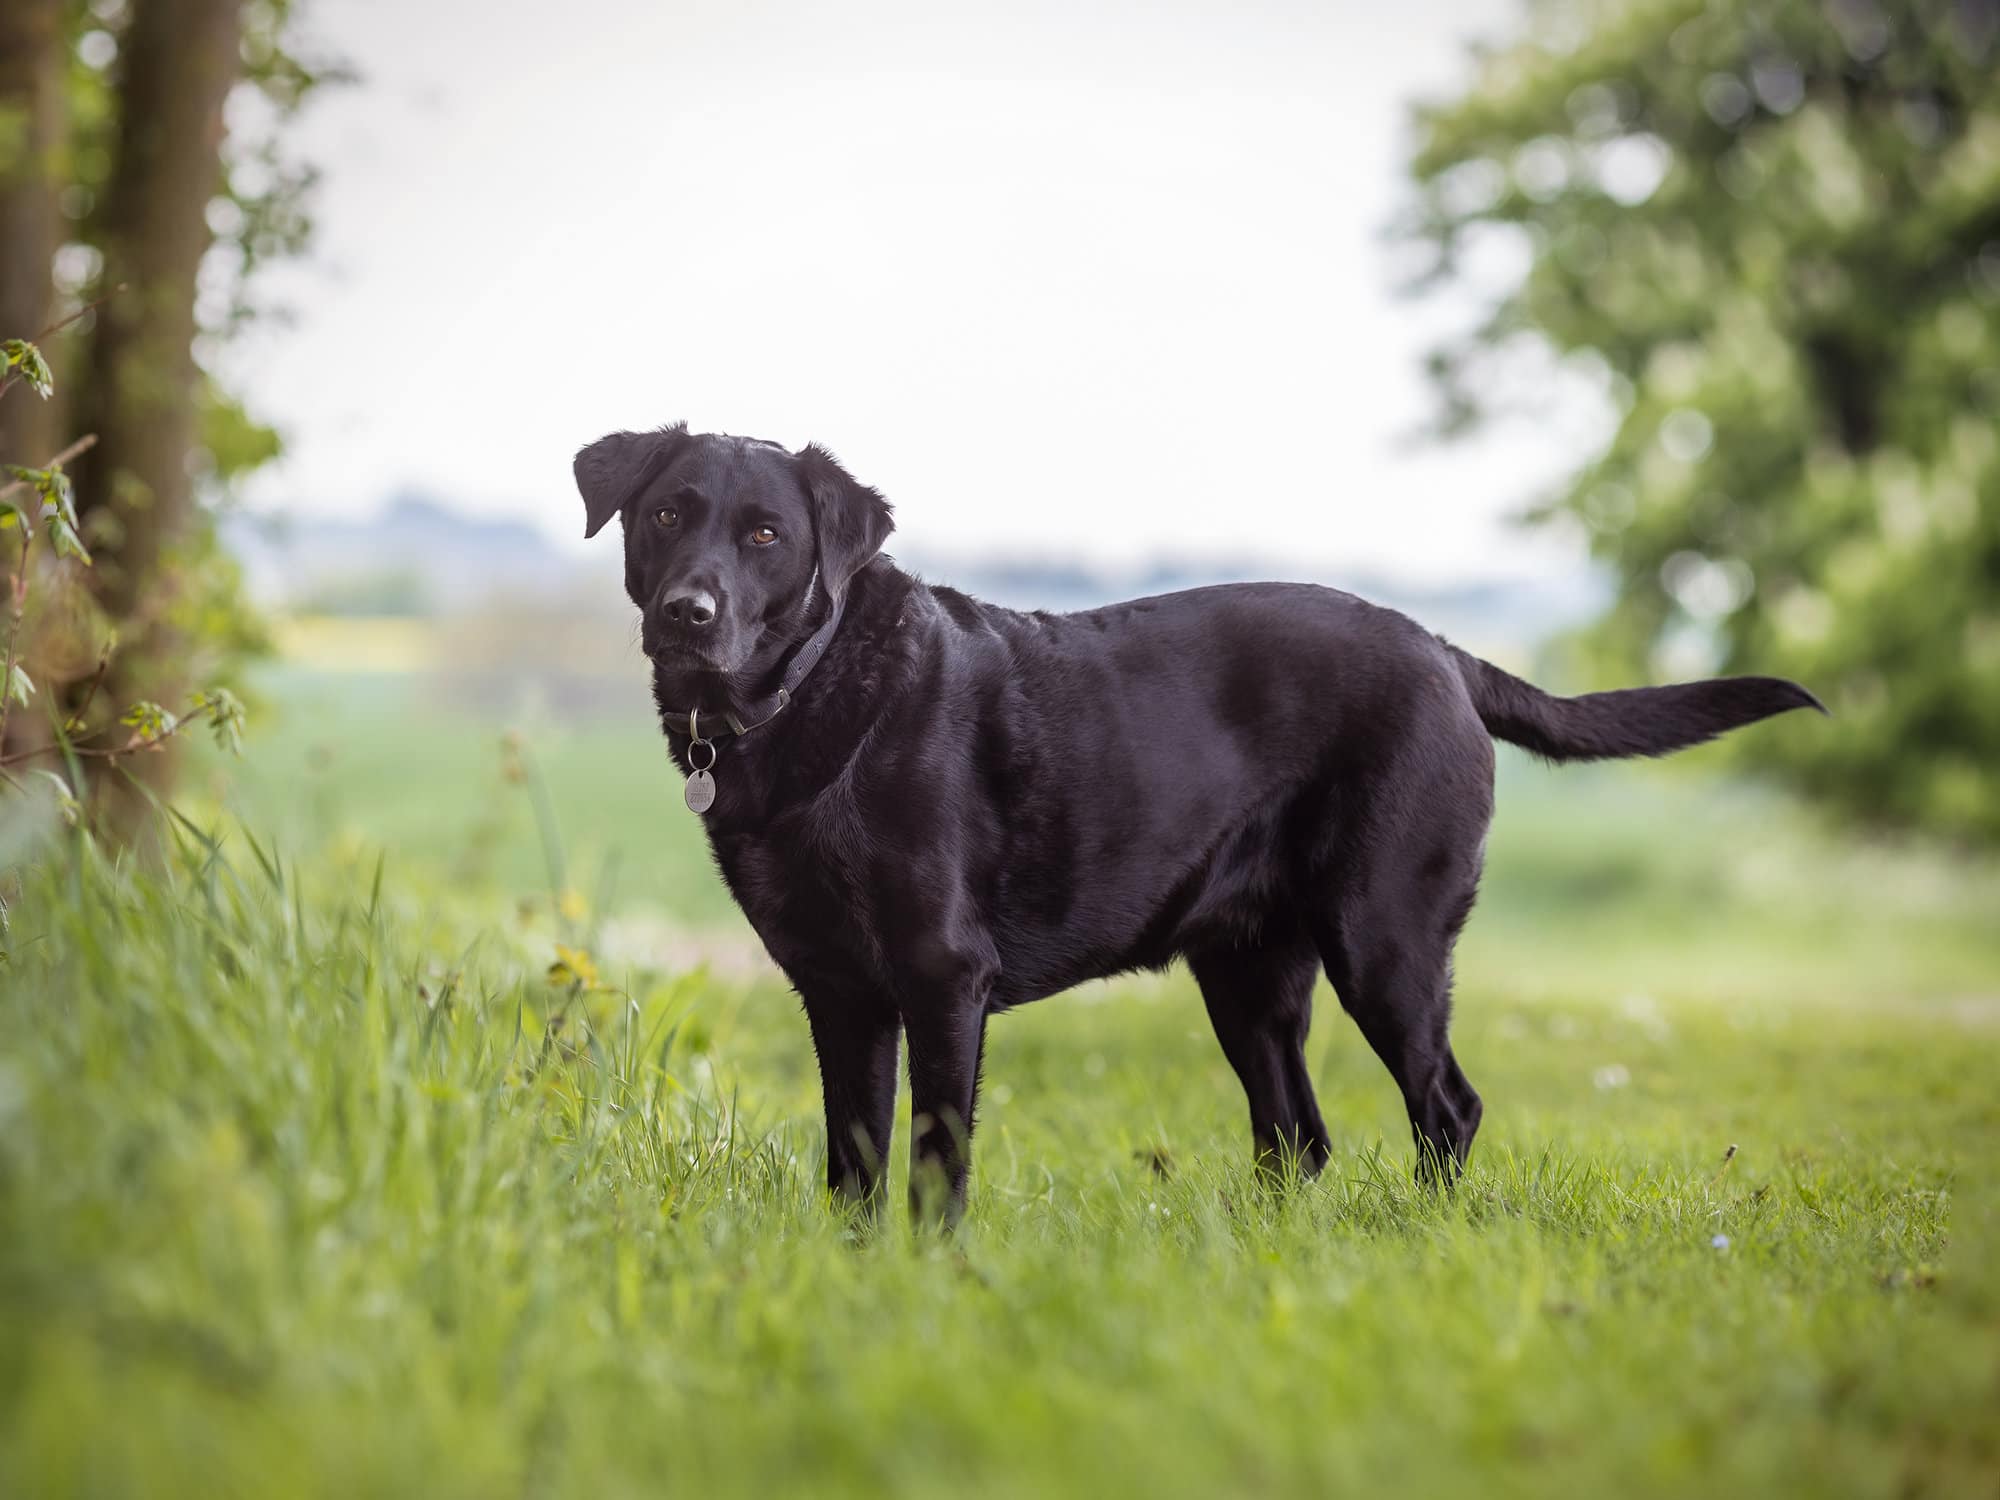 Black Labrador photographed in a field in suffolk